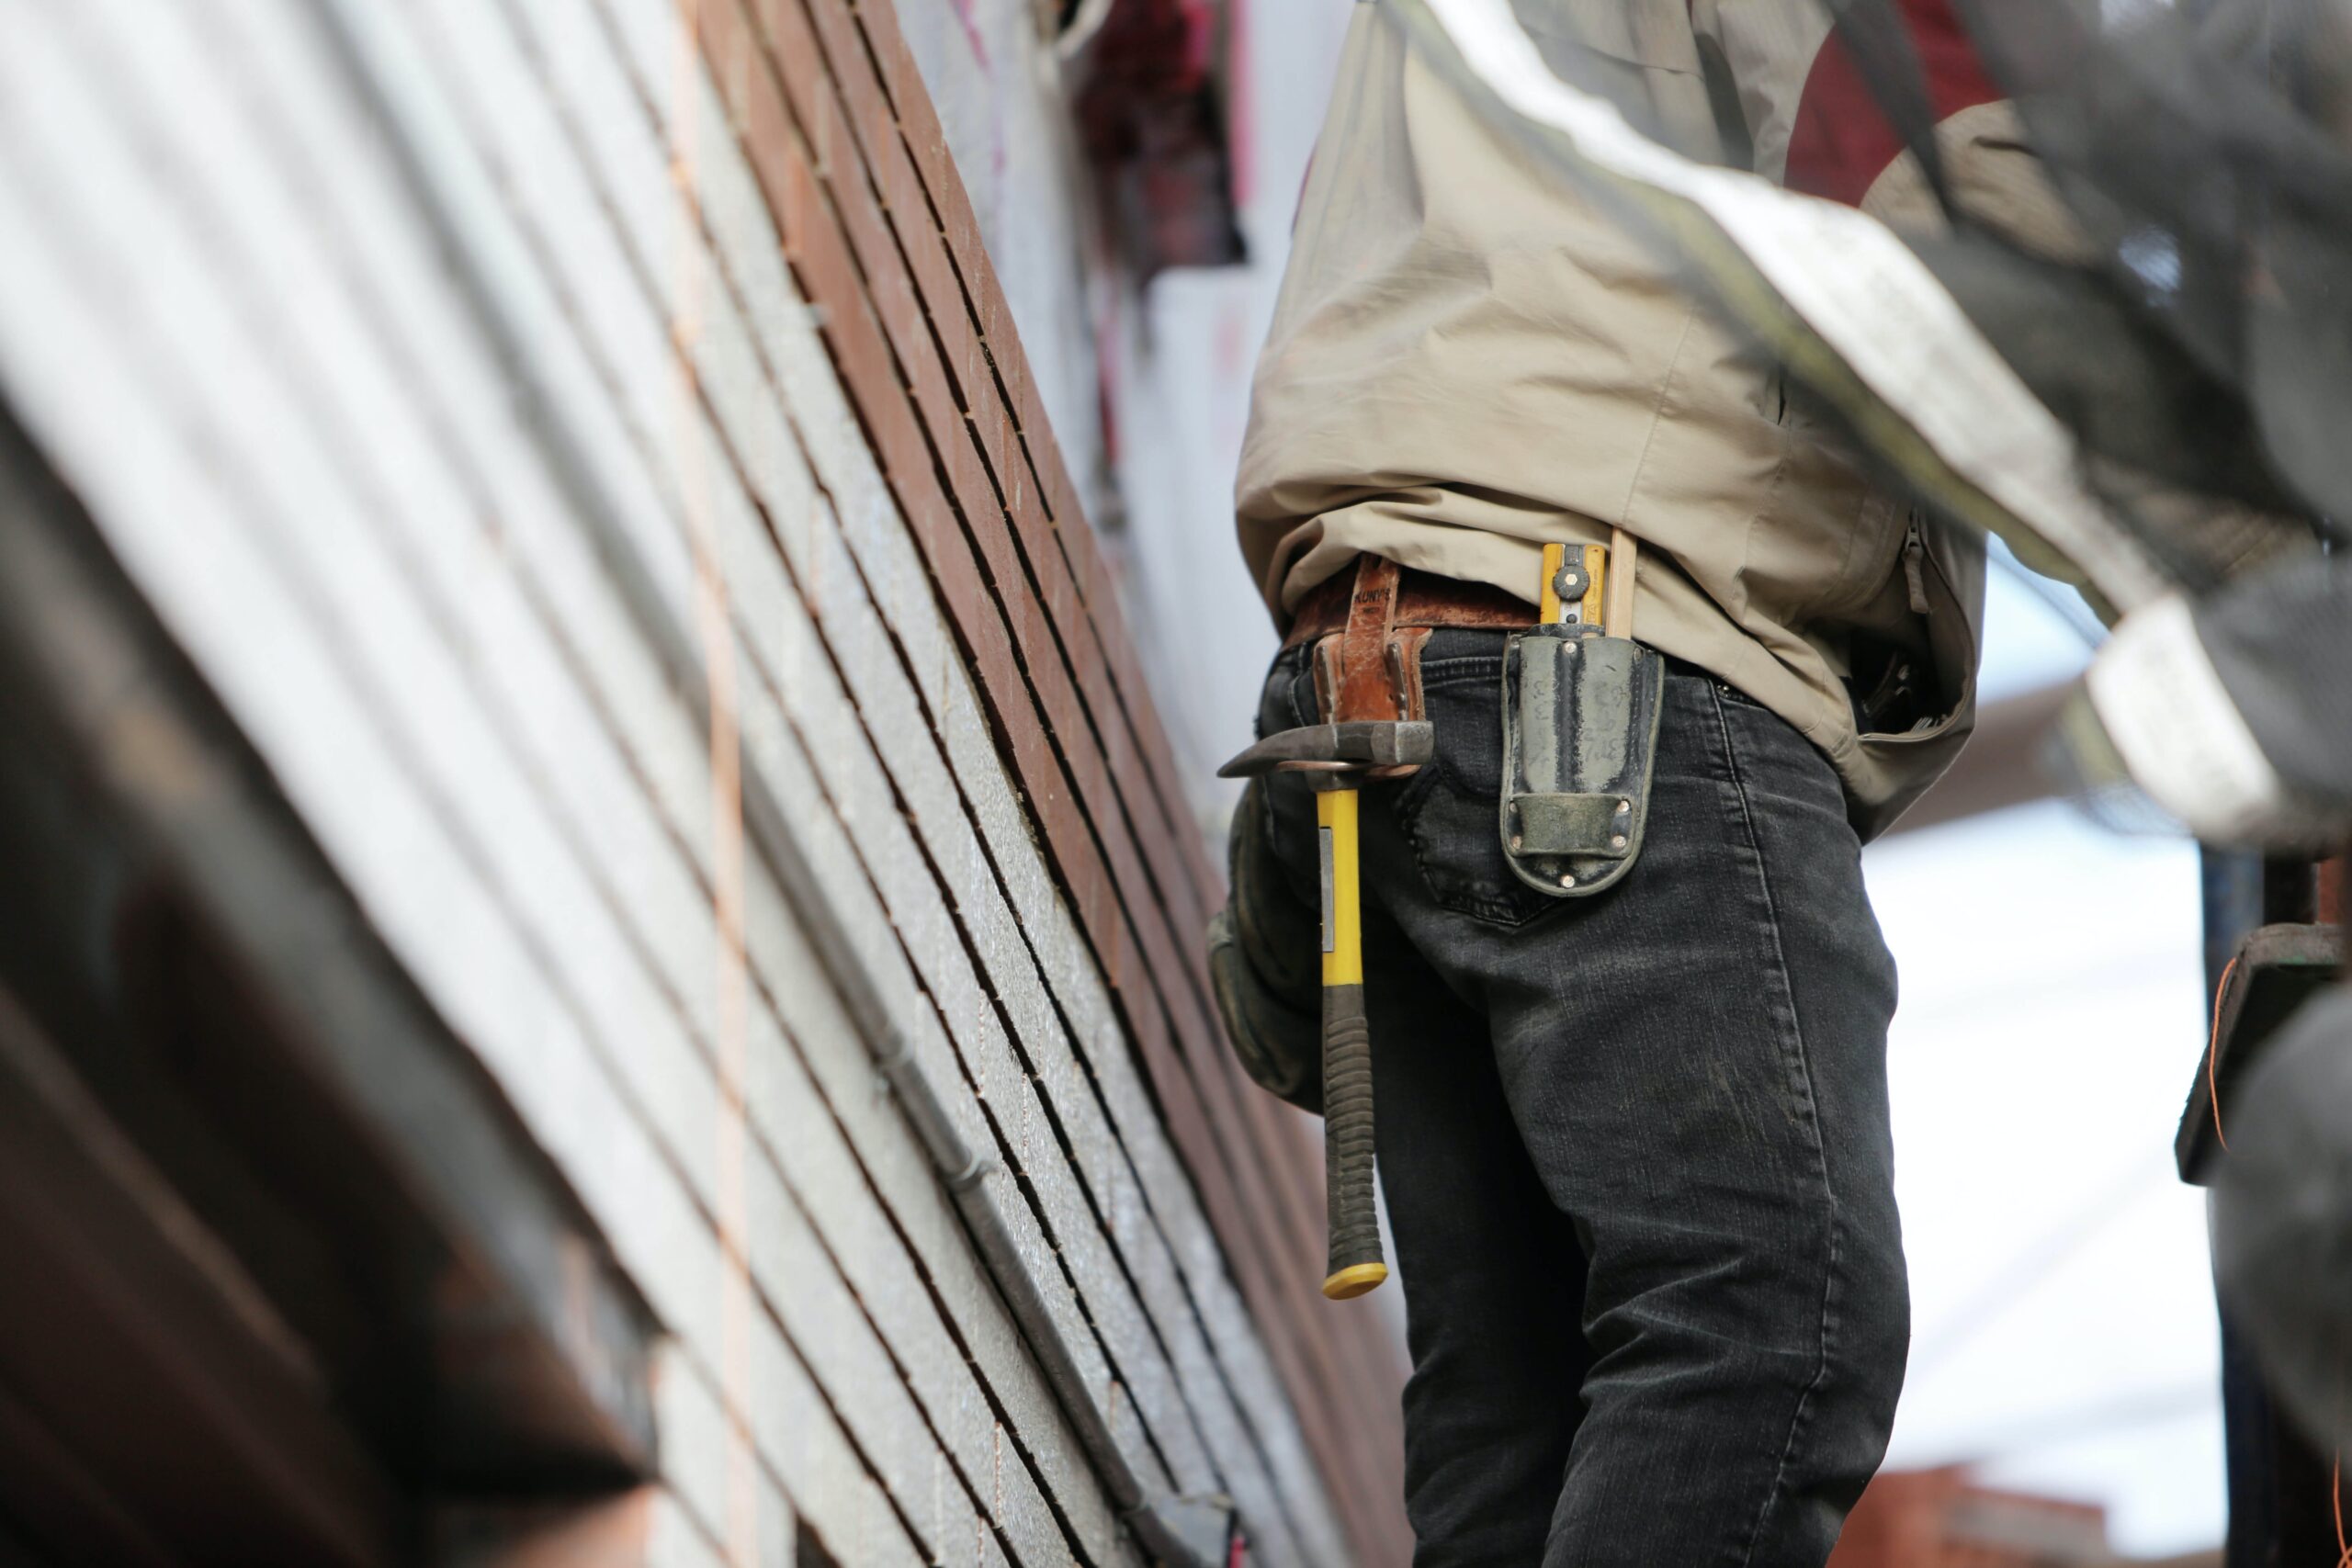 10 Types of Contractors in the Construction Industry